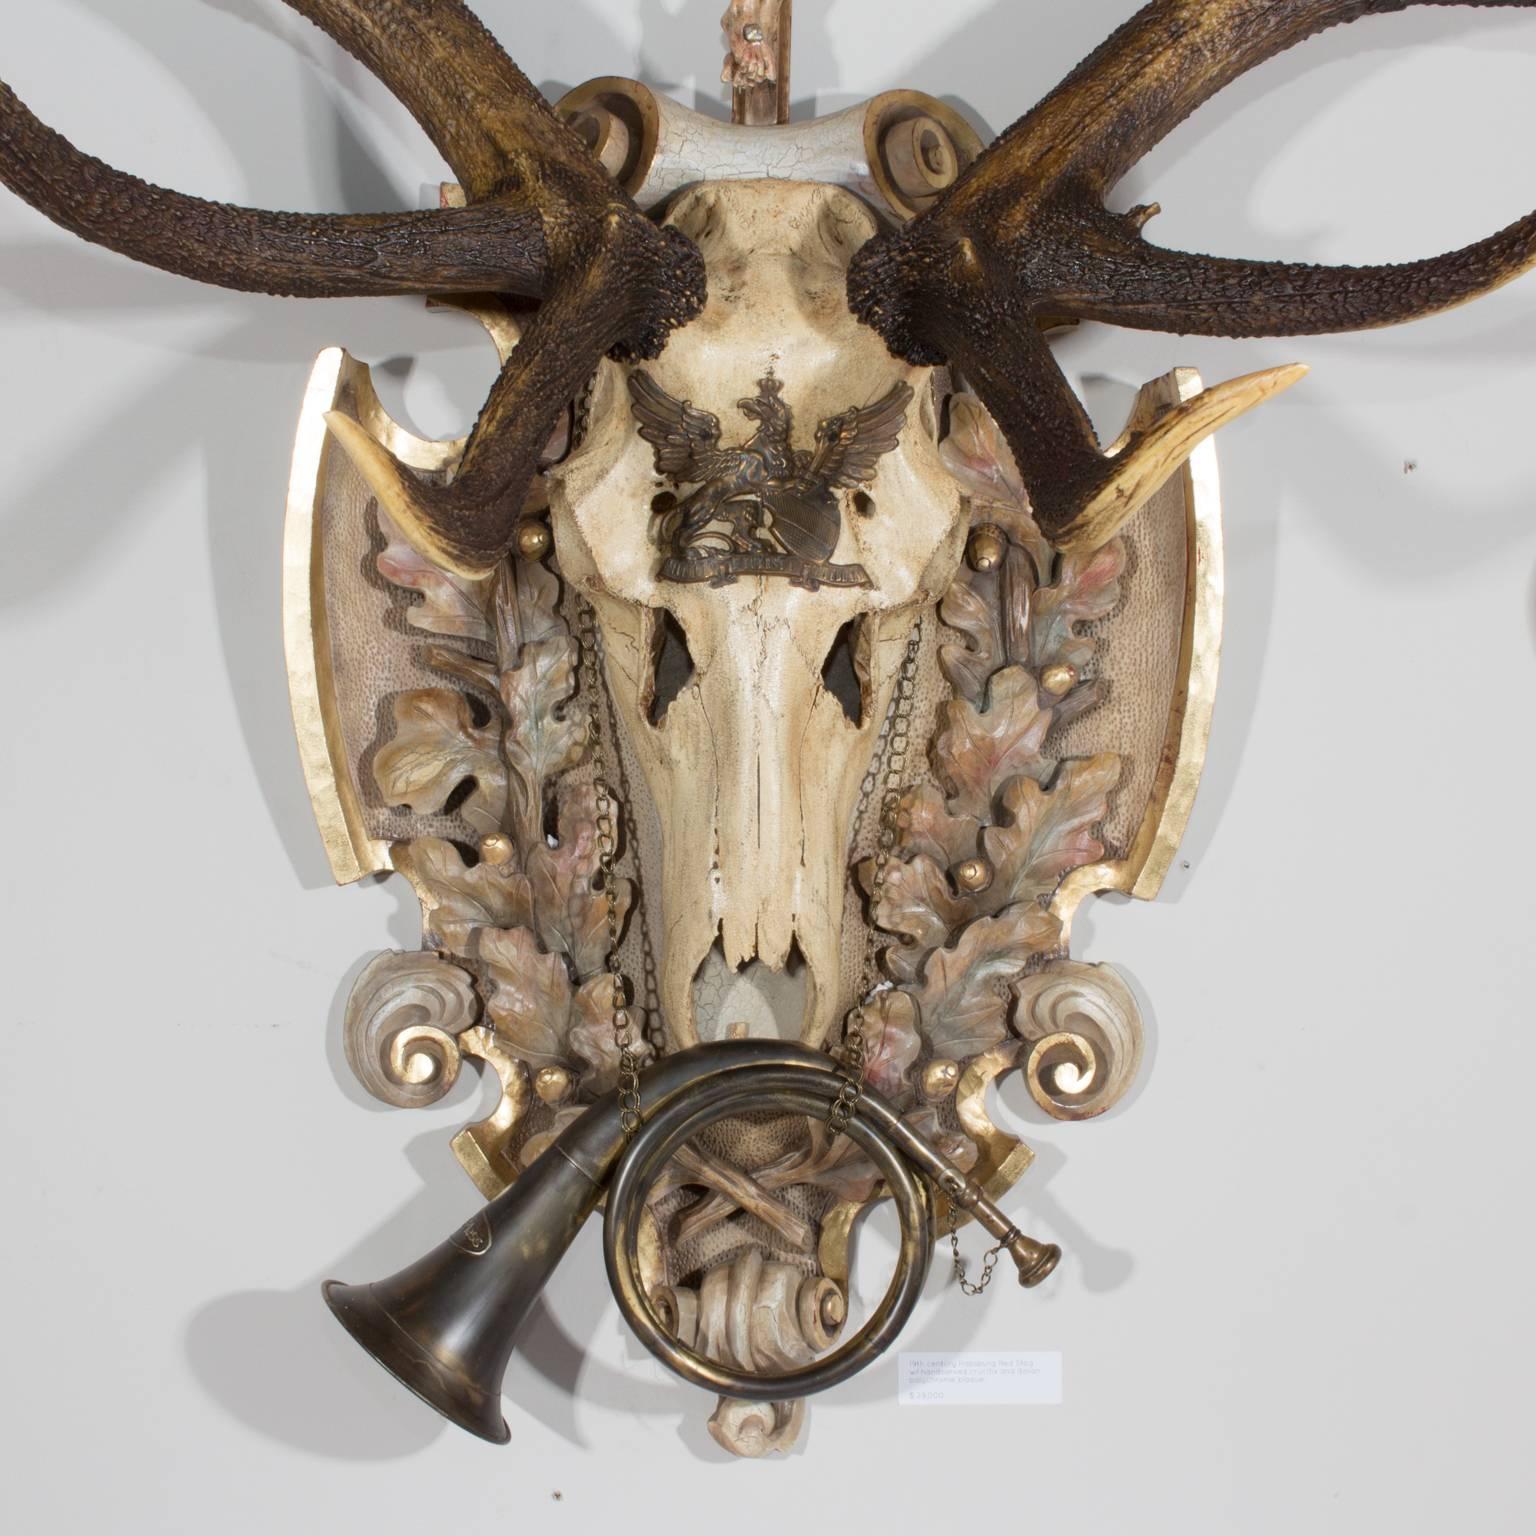 Truly an exceptional piece in the collection, this magnificent 19th century St. Hubertus Red Stag hunting trophy originated from the Eckartsau castle of Emperor Franz Joseph in the Southern Austrian Alps.

Eckartsau was a favorite hunting schloss